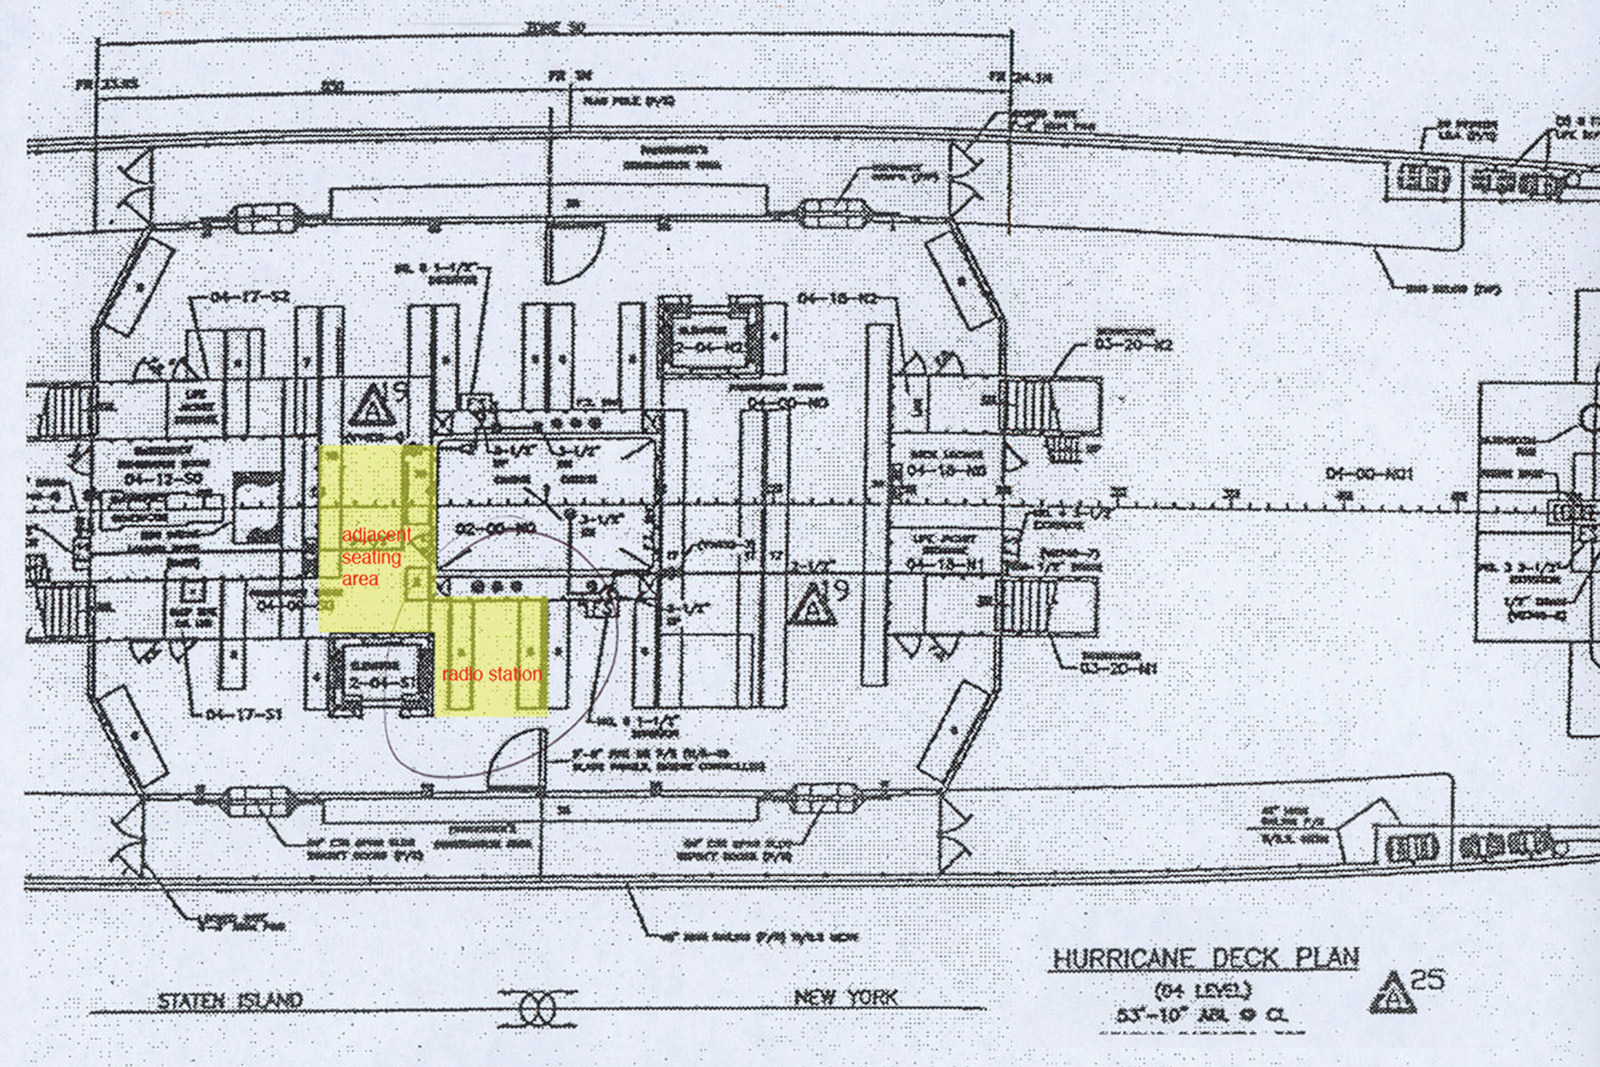 Floorplan of the hurricane deck of the Molinari class ferries. Areas marked in yellow were delegated to neuroTransmitter for radio station and performance use.